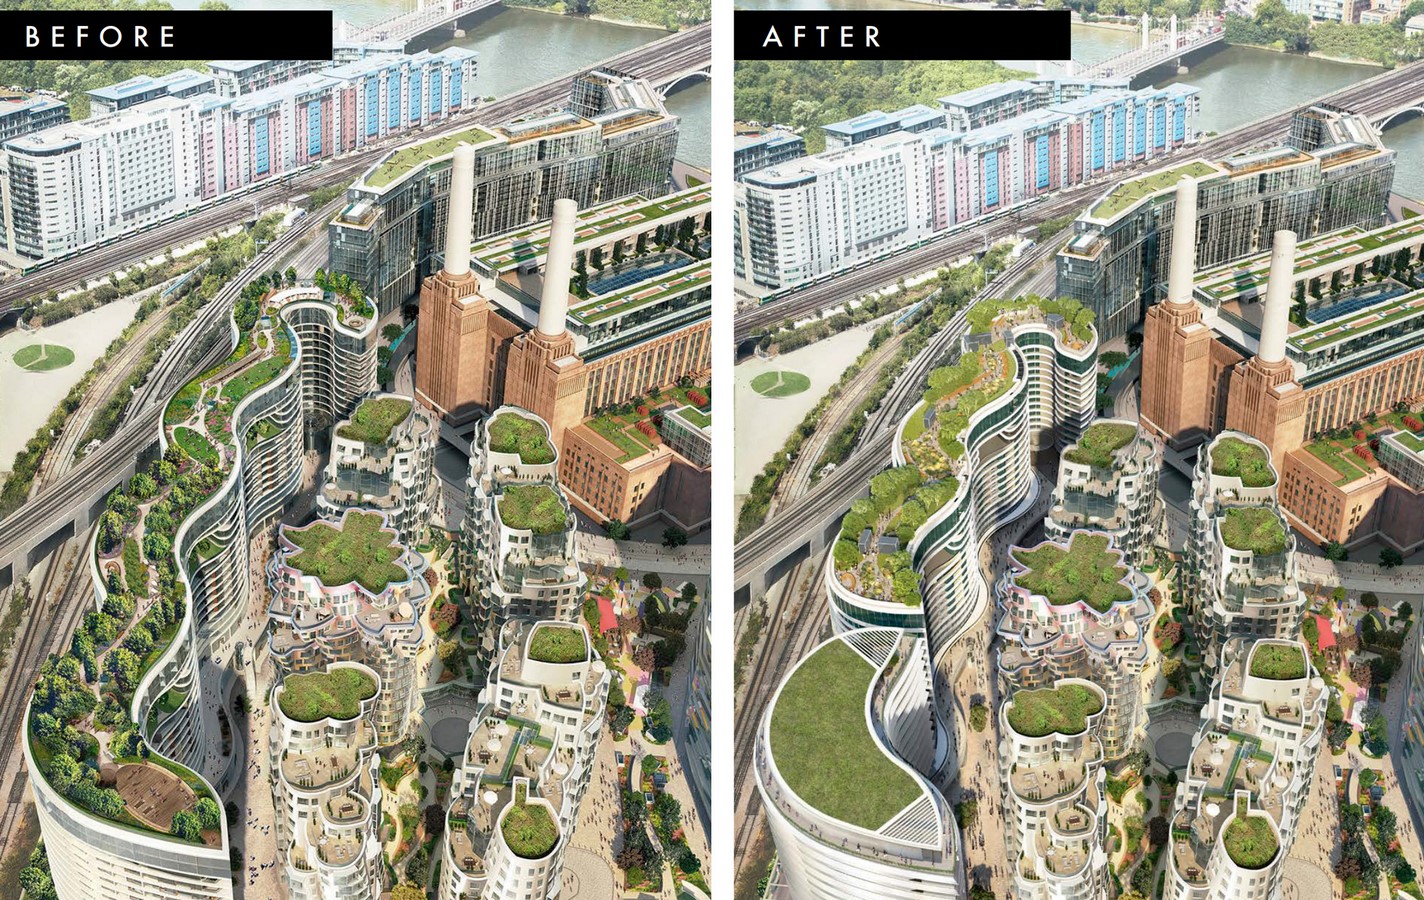 Battersea Power Station redevelopment extention revealed in the before and after images - Sheet1